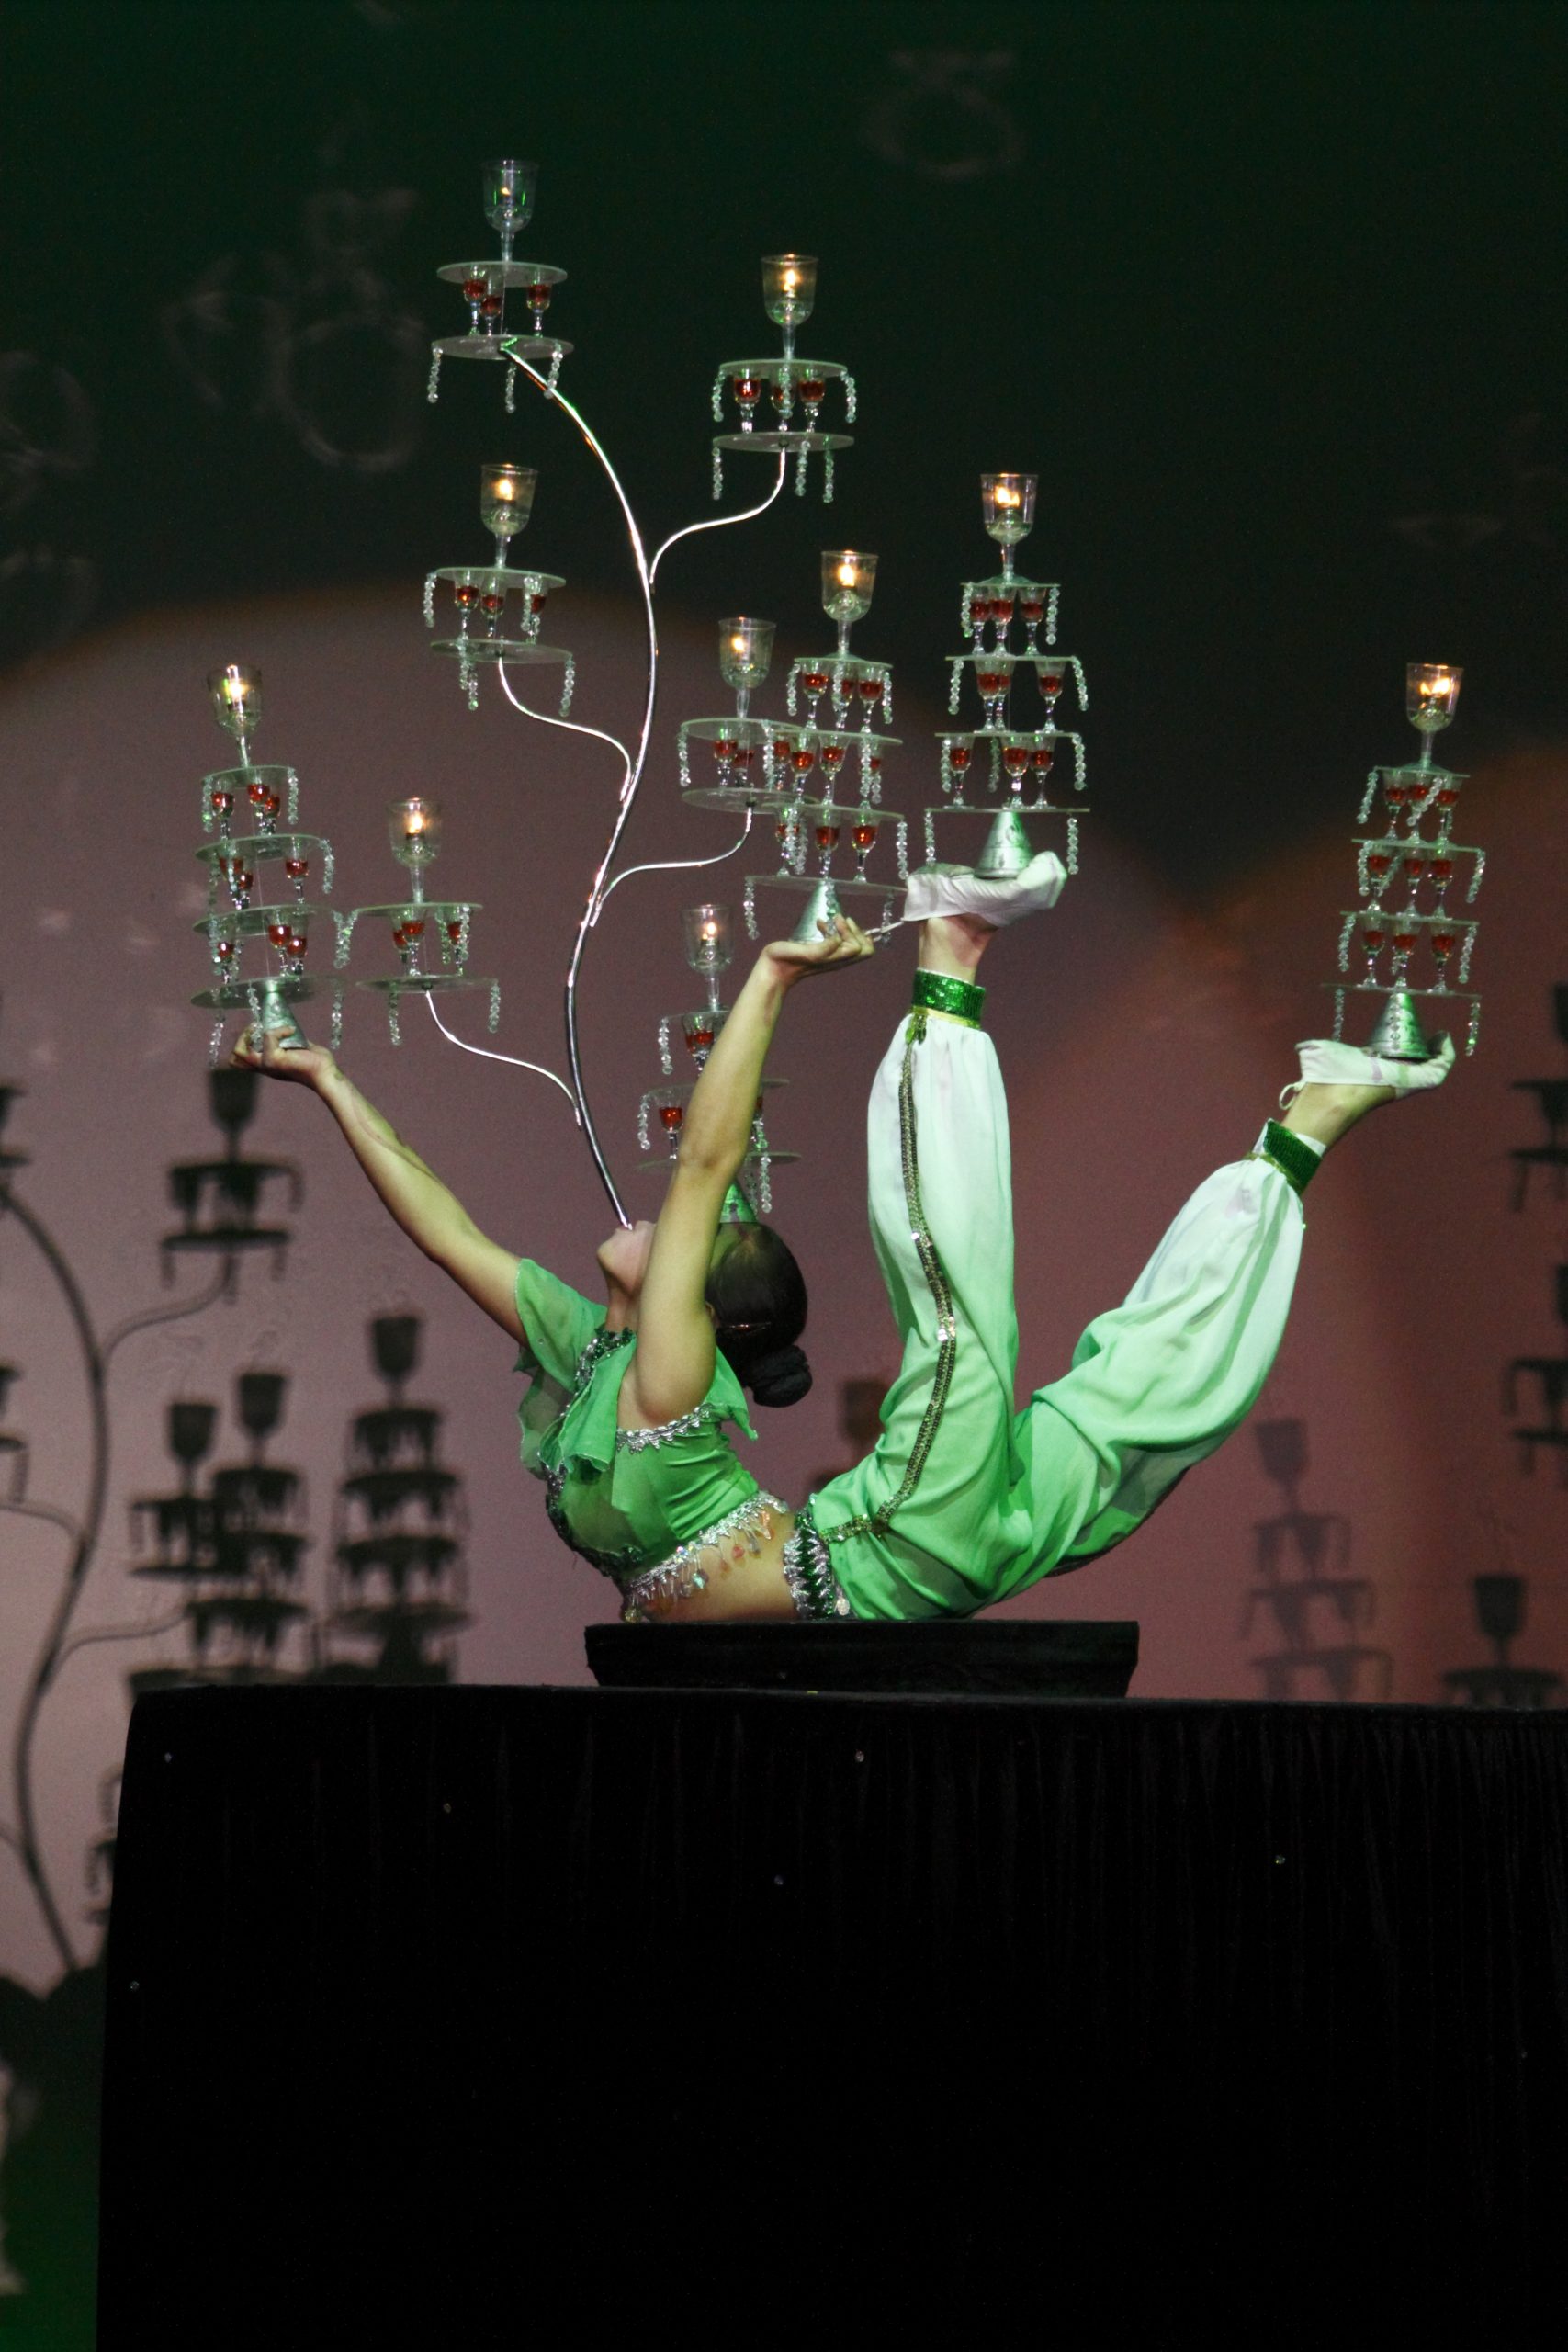 Peking Acrobats Return to the Weis Center « Weis Center for the